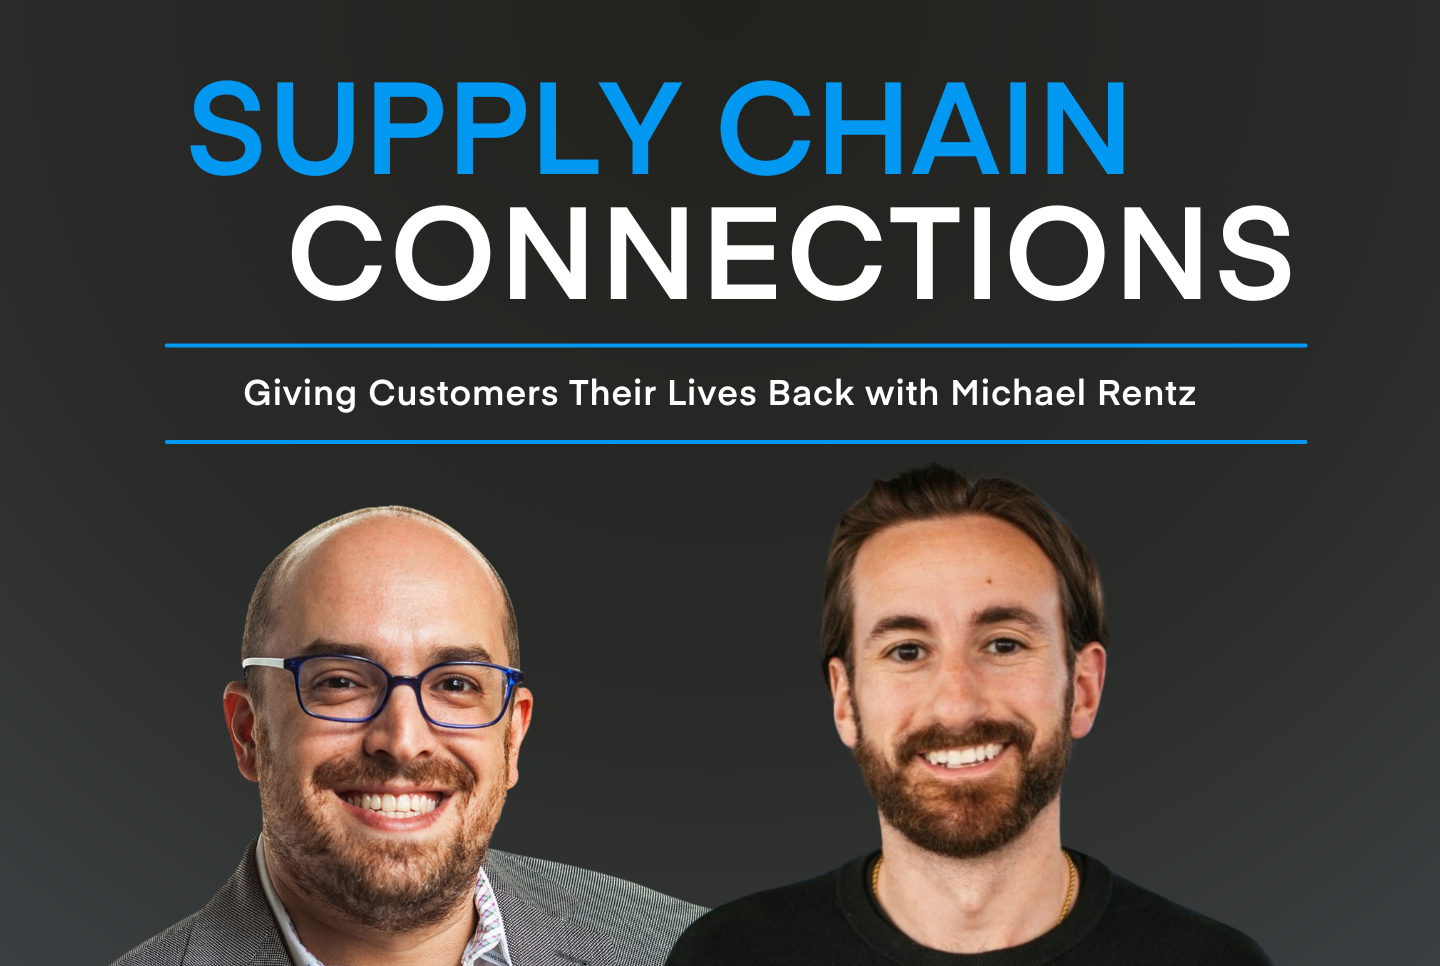 Giving Customers Their Lives Back with Michael Rentz